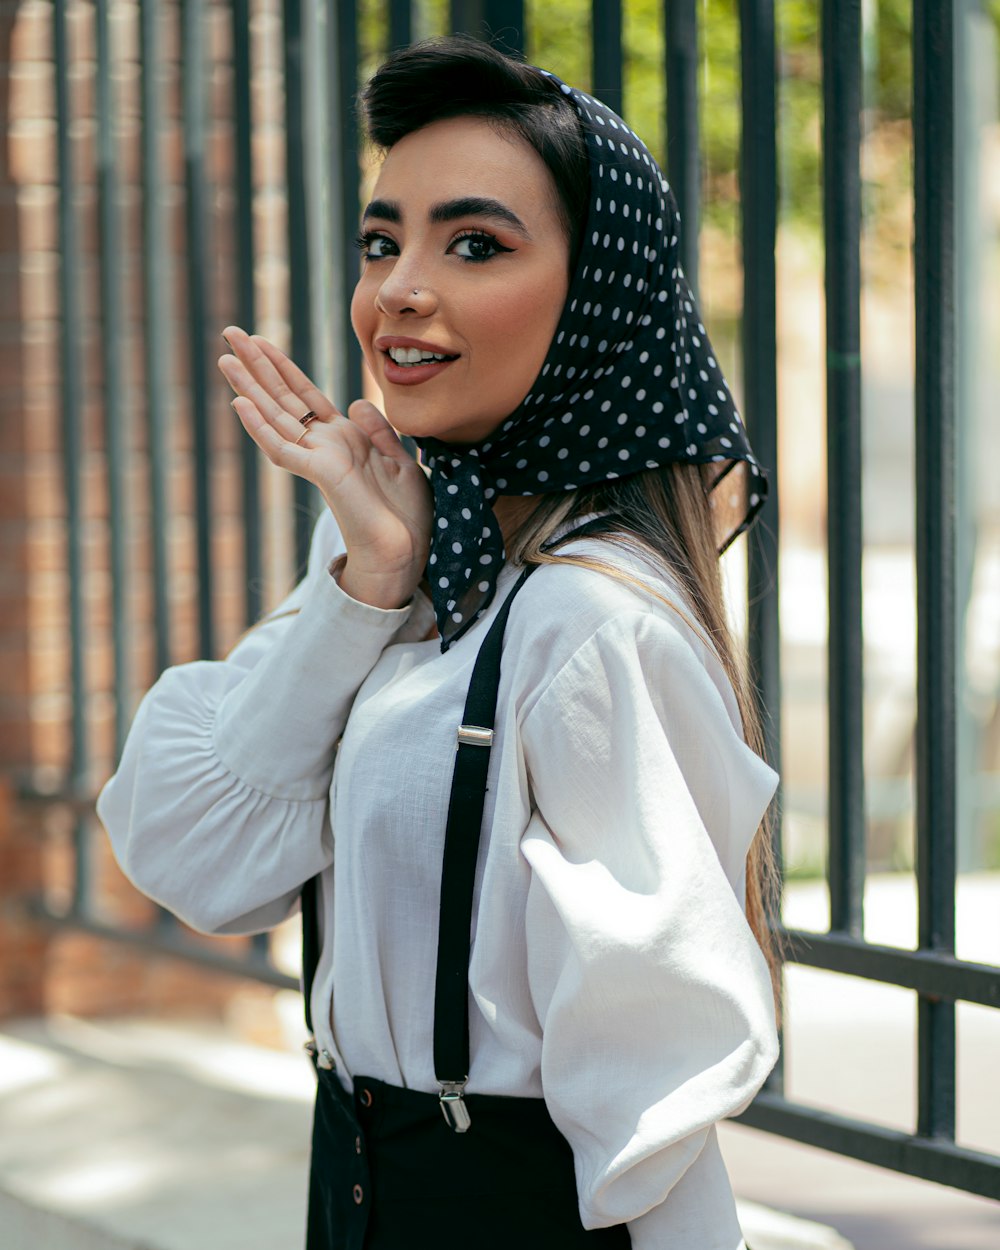 woman in white long sleeve shirt and black and white polka dot hijab